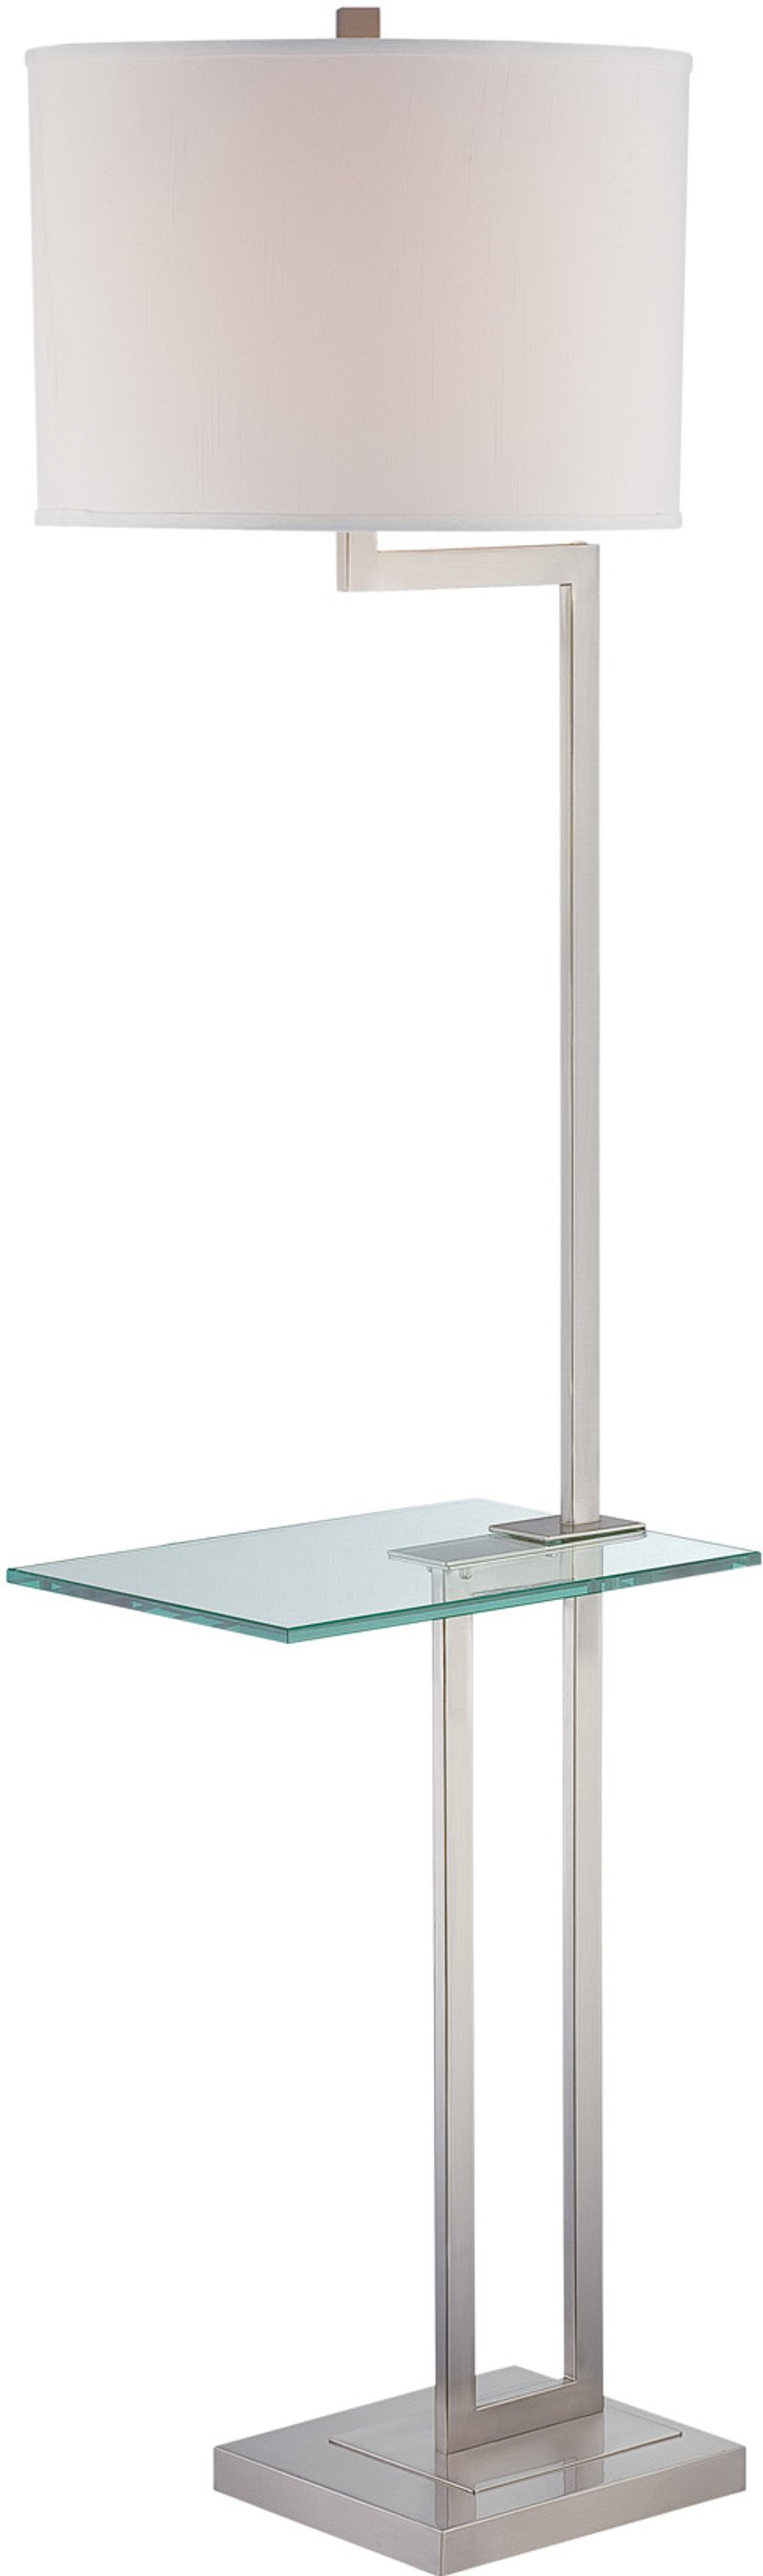 Floor Table Lamp With Glass Tray, Modern Tray Table Floor Lamp